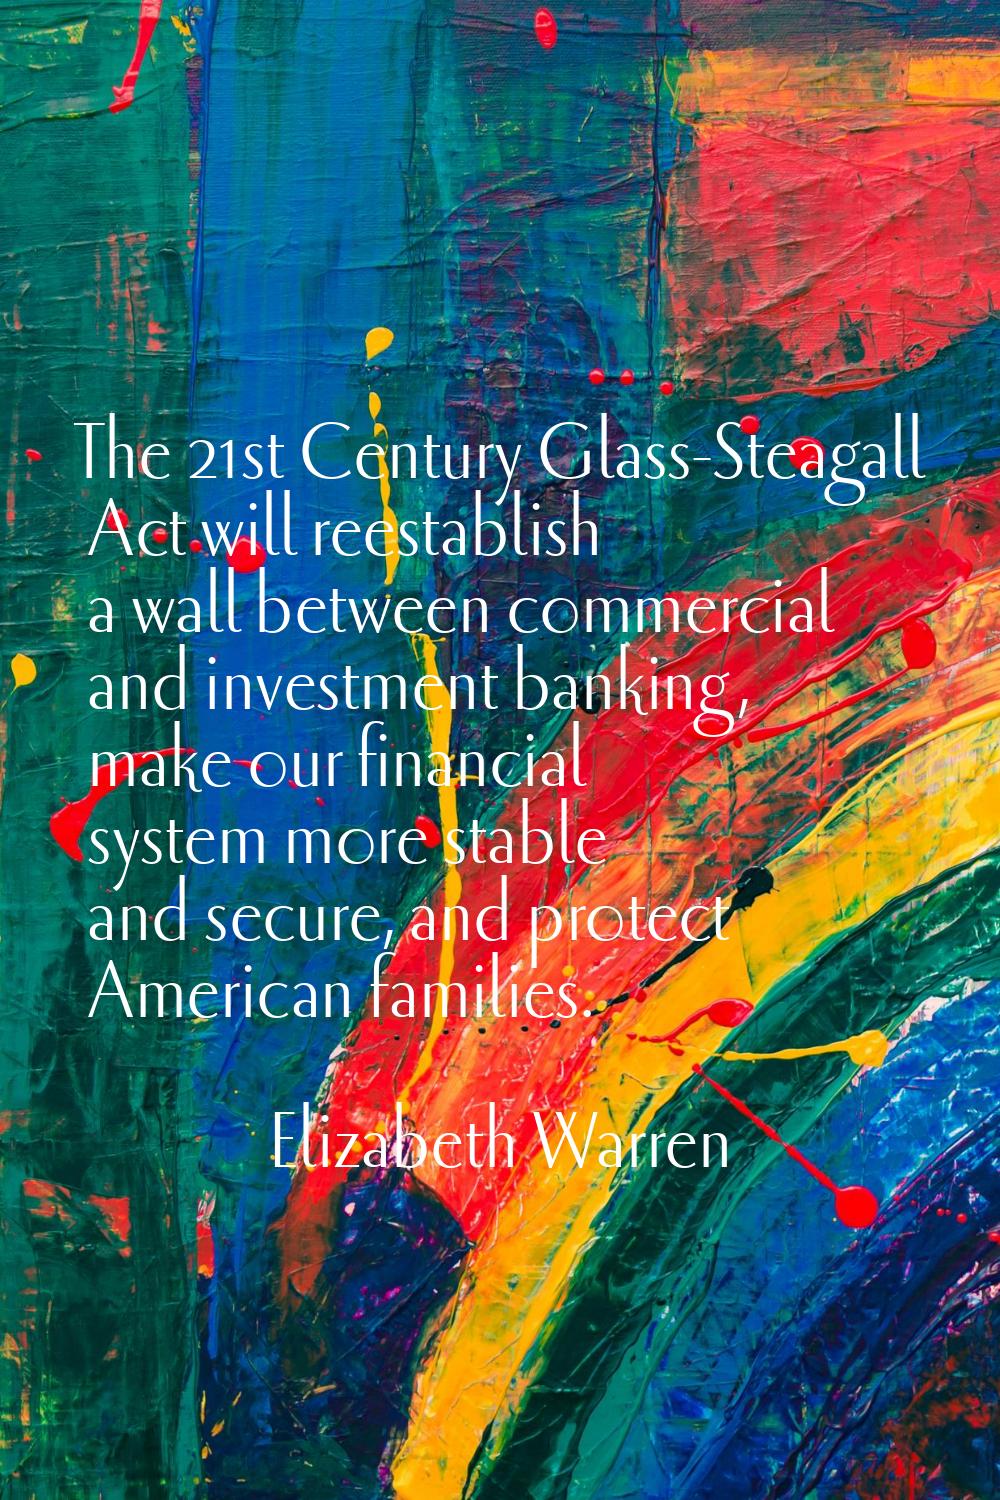 The 21st Century Glass-Steagall Act will reestablish a wall between commercial and investment banki